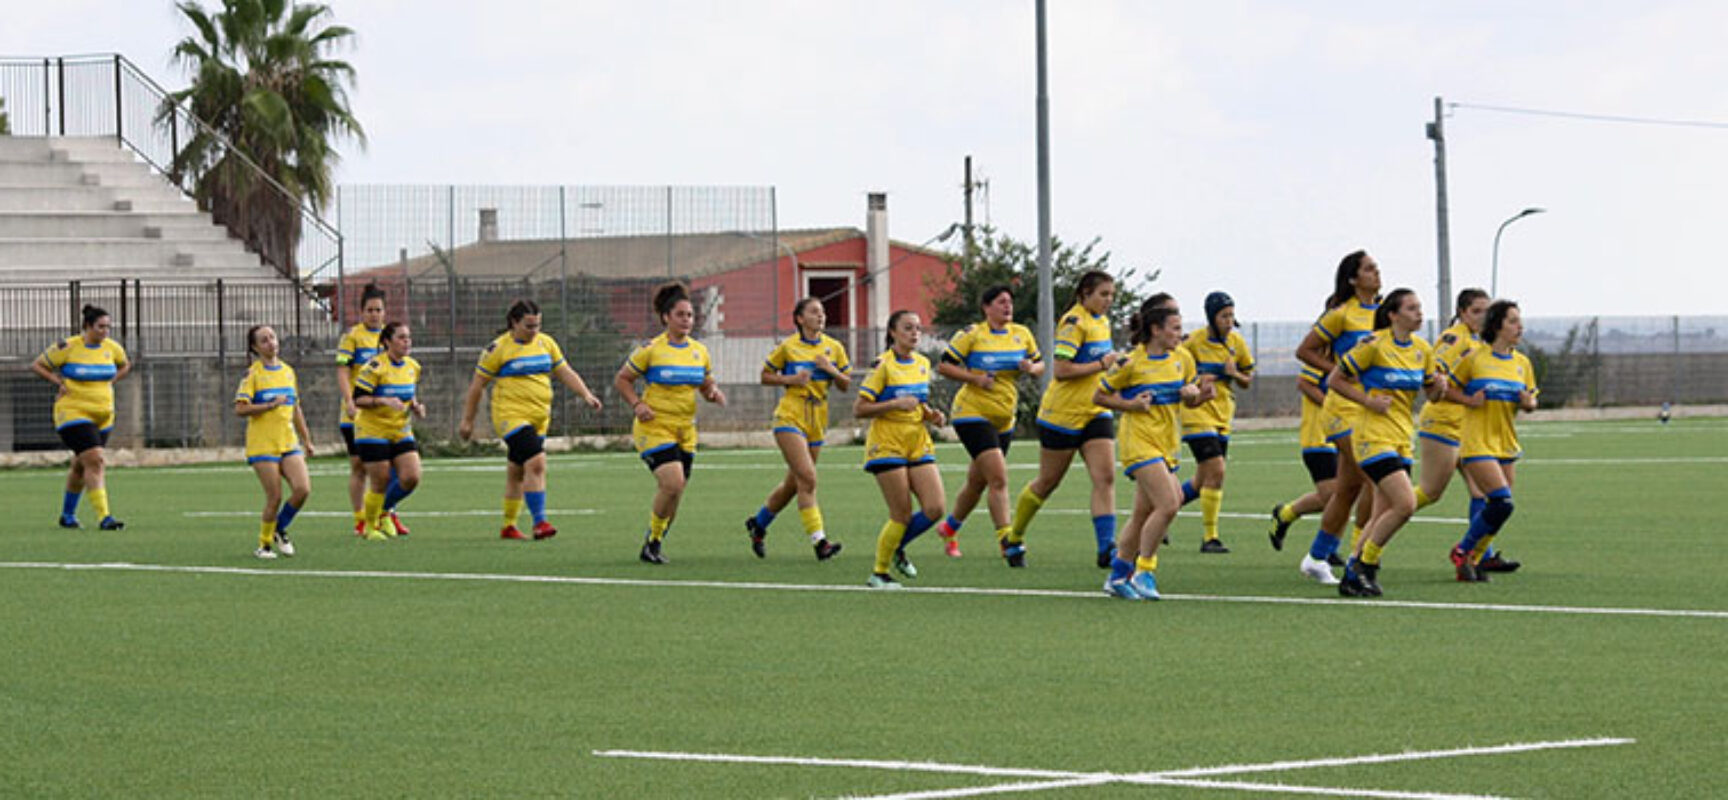 Rugby, esordio a Bisceglie per le Bees che ospitano le All Reds